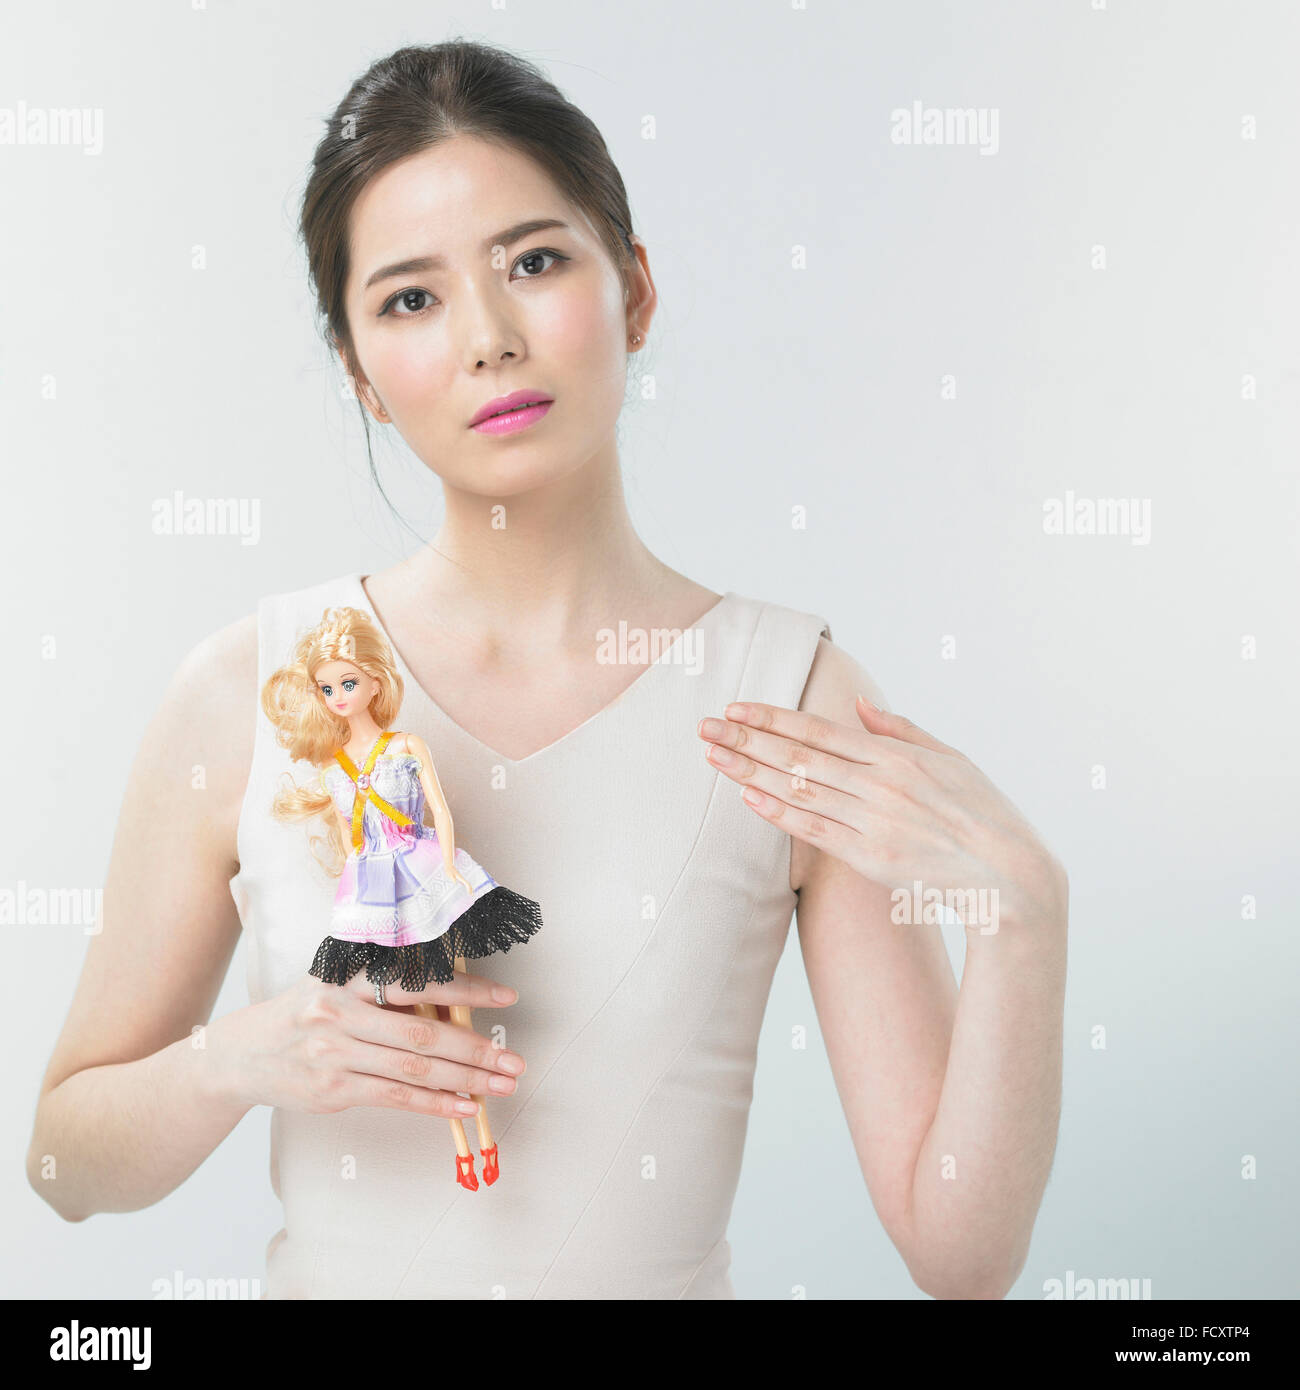 Portrait of yong woman posing with a barbie doll Stock Photo